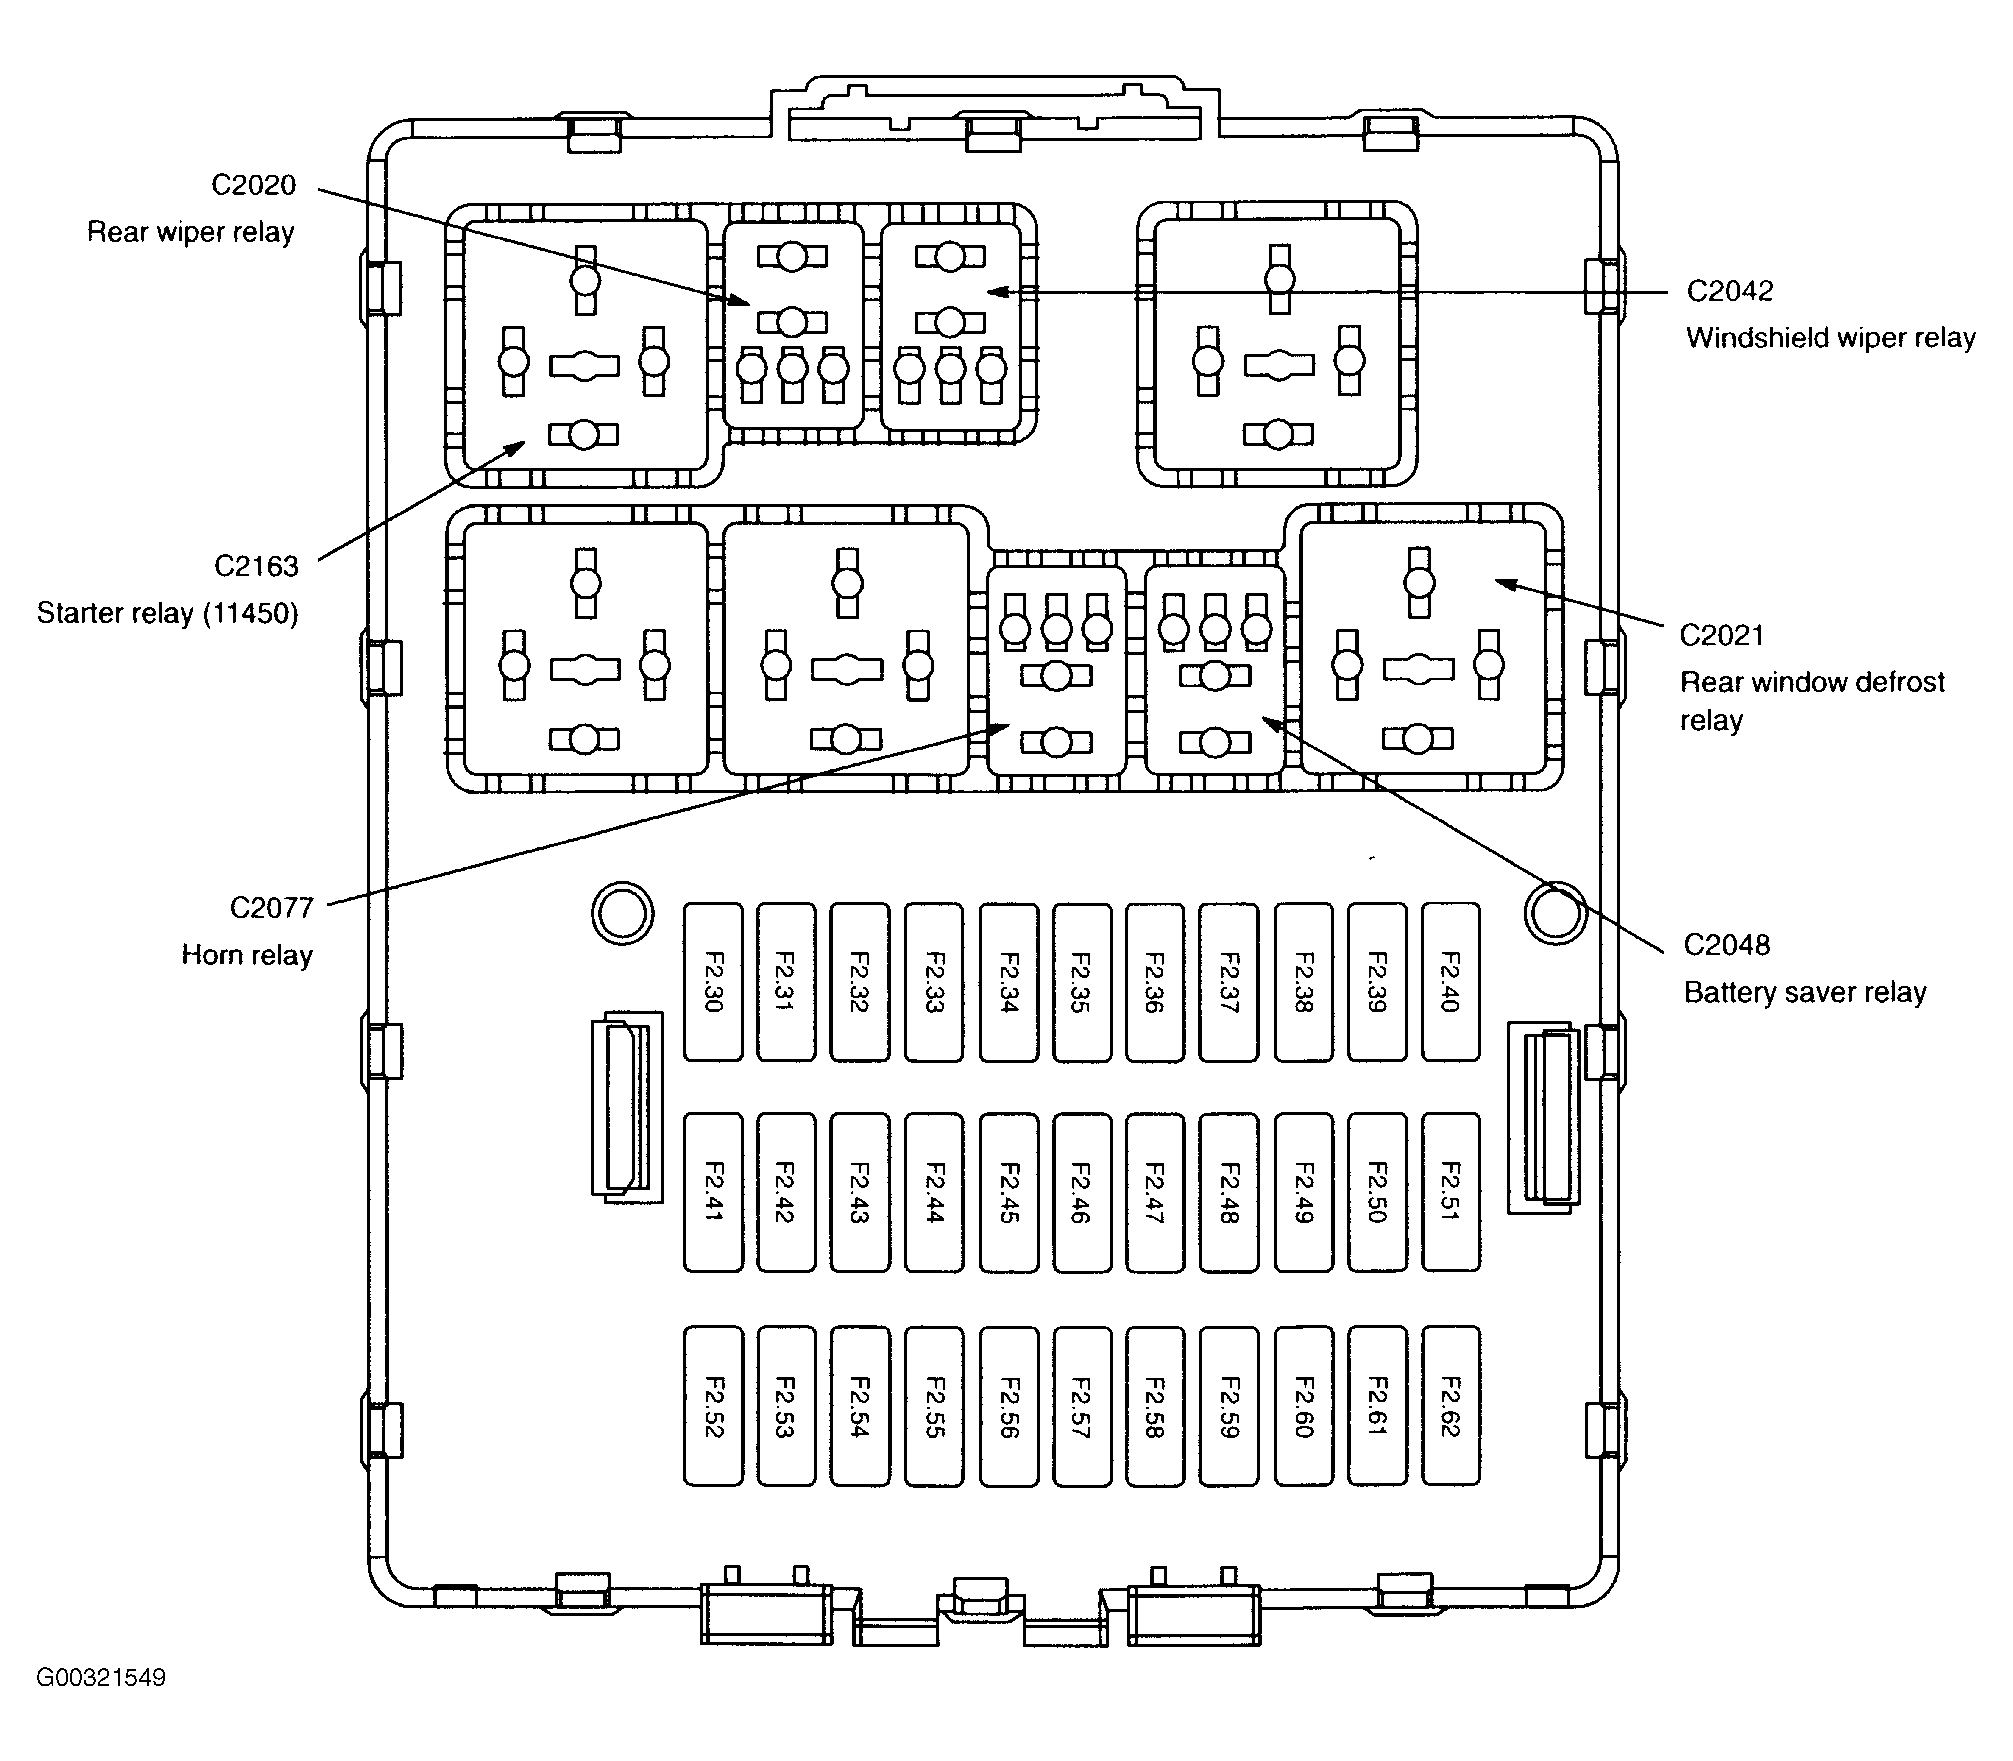 Fuse Diagram for the Both Fuse Boxes Needed